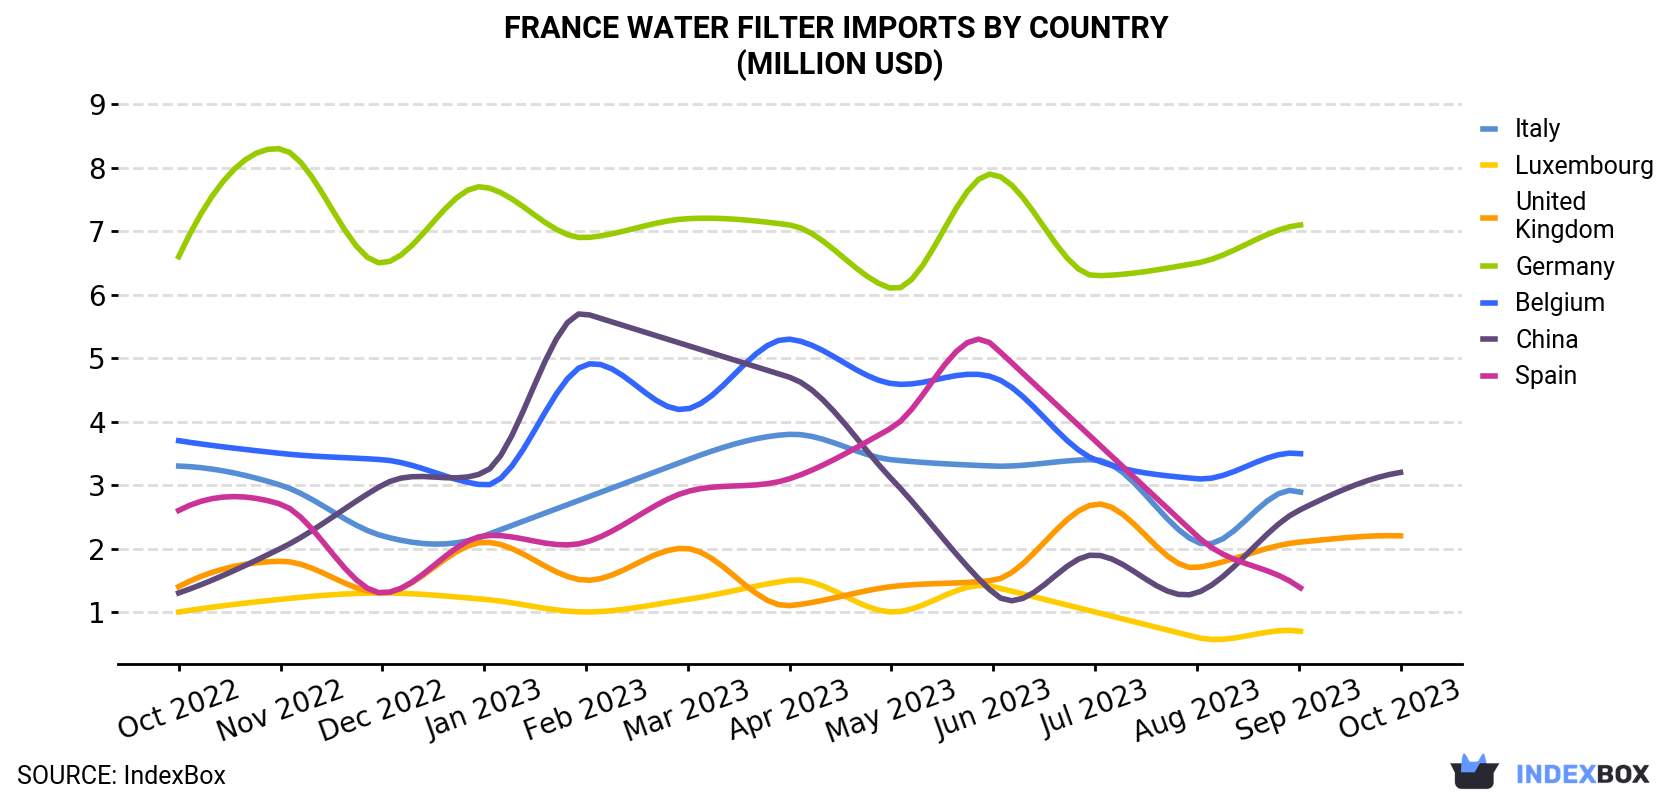 France Water Filter Imports By Country (Million USD)